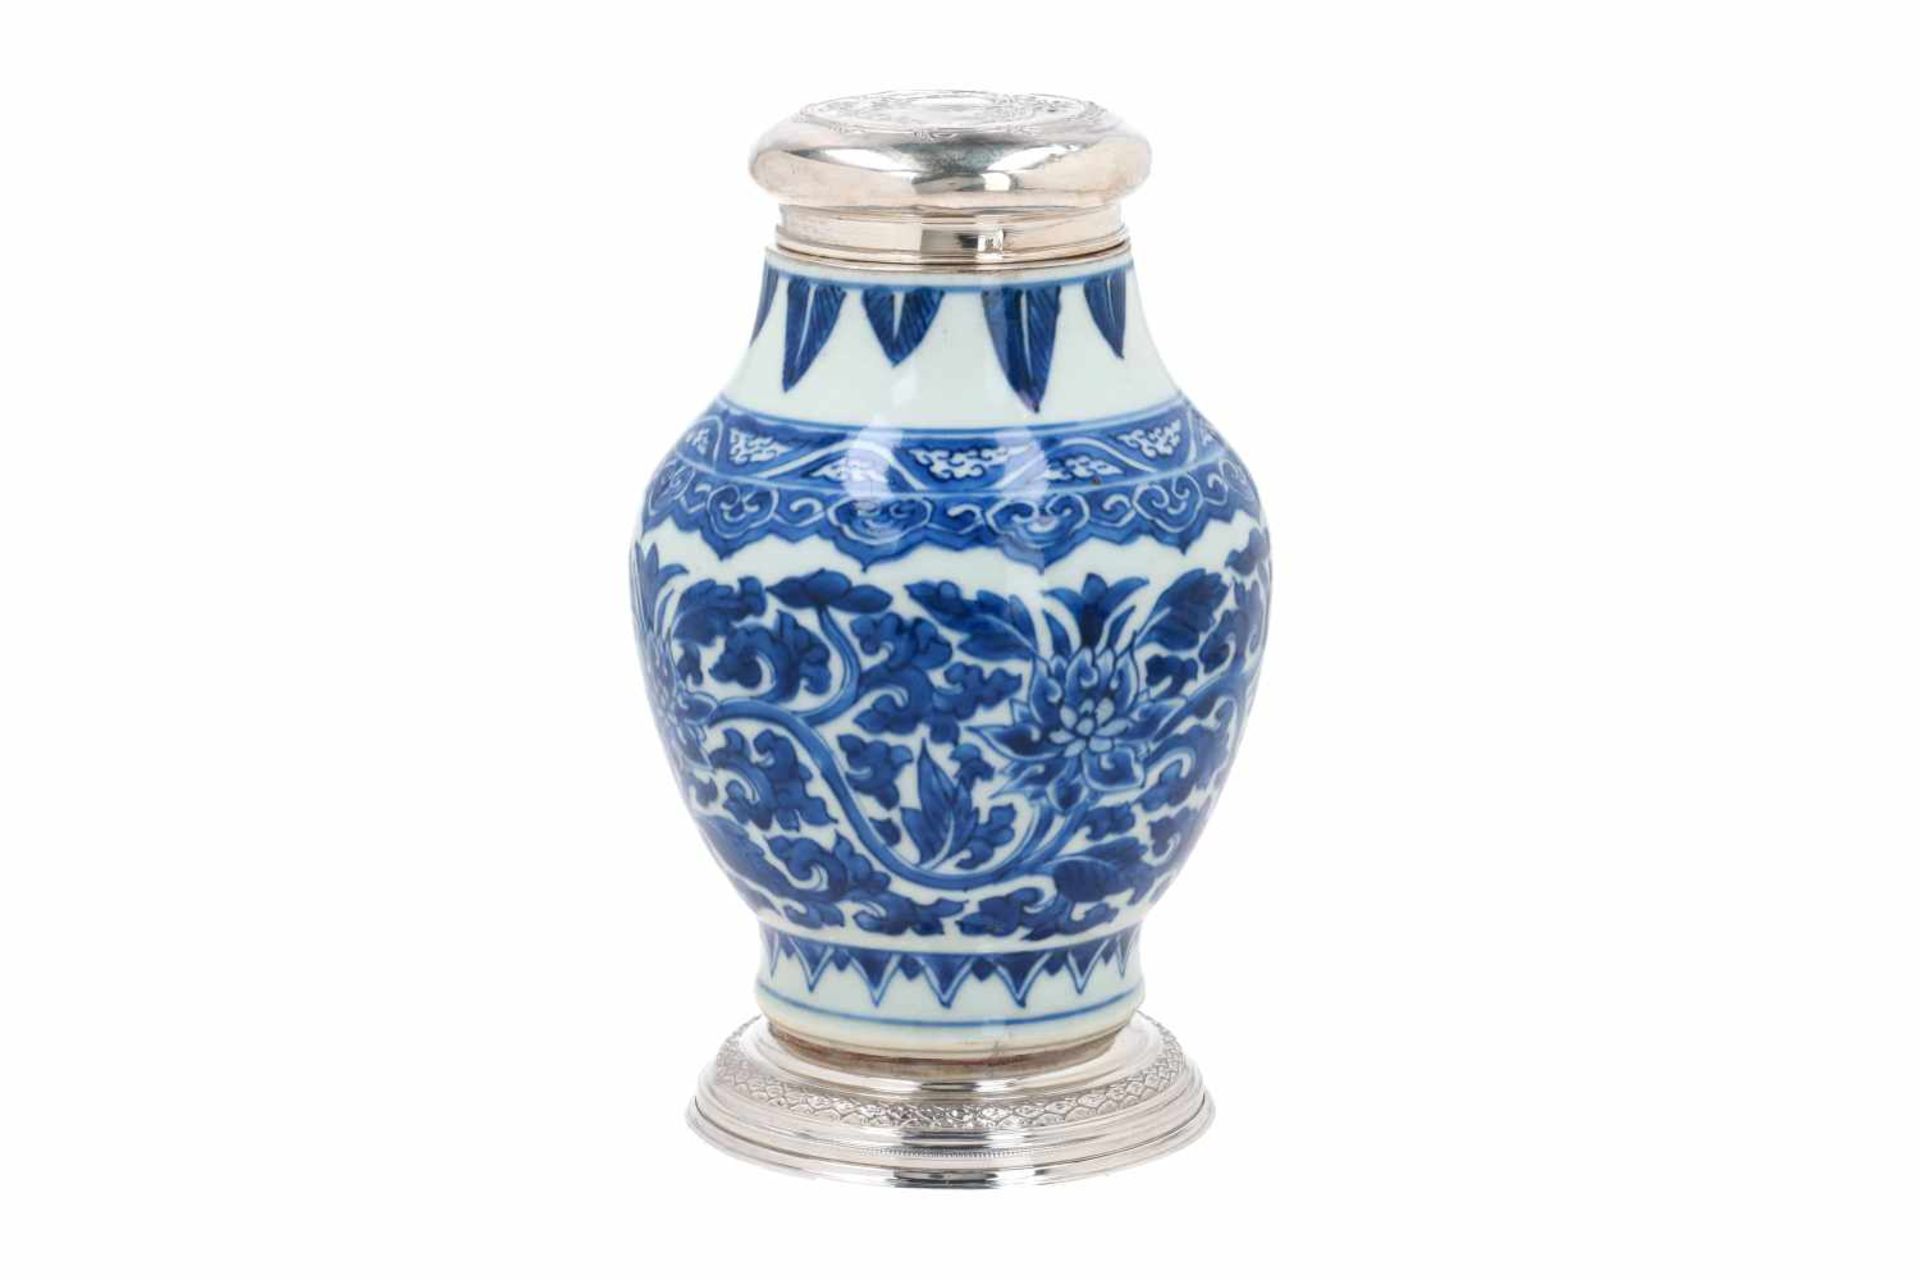 A blue and white porcelain jar with silver ring (ca. 1900) and cover, decorated with flowers and